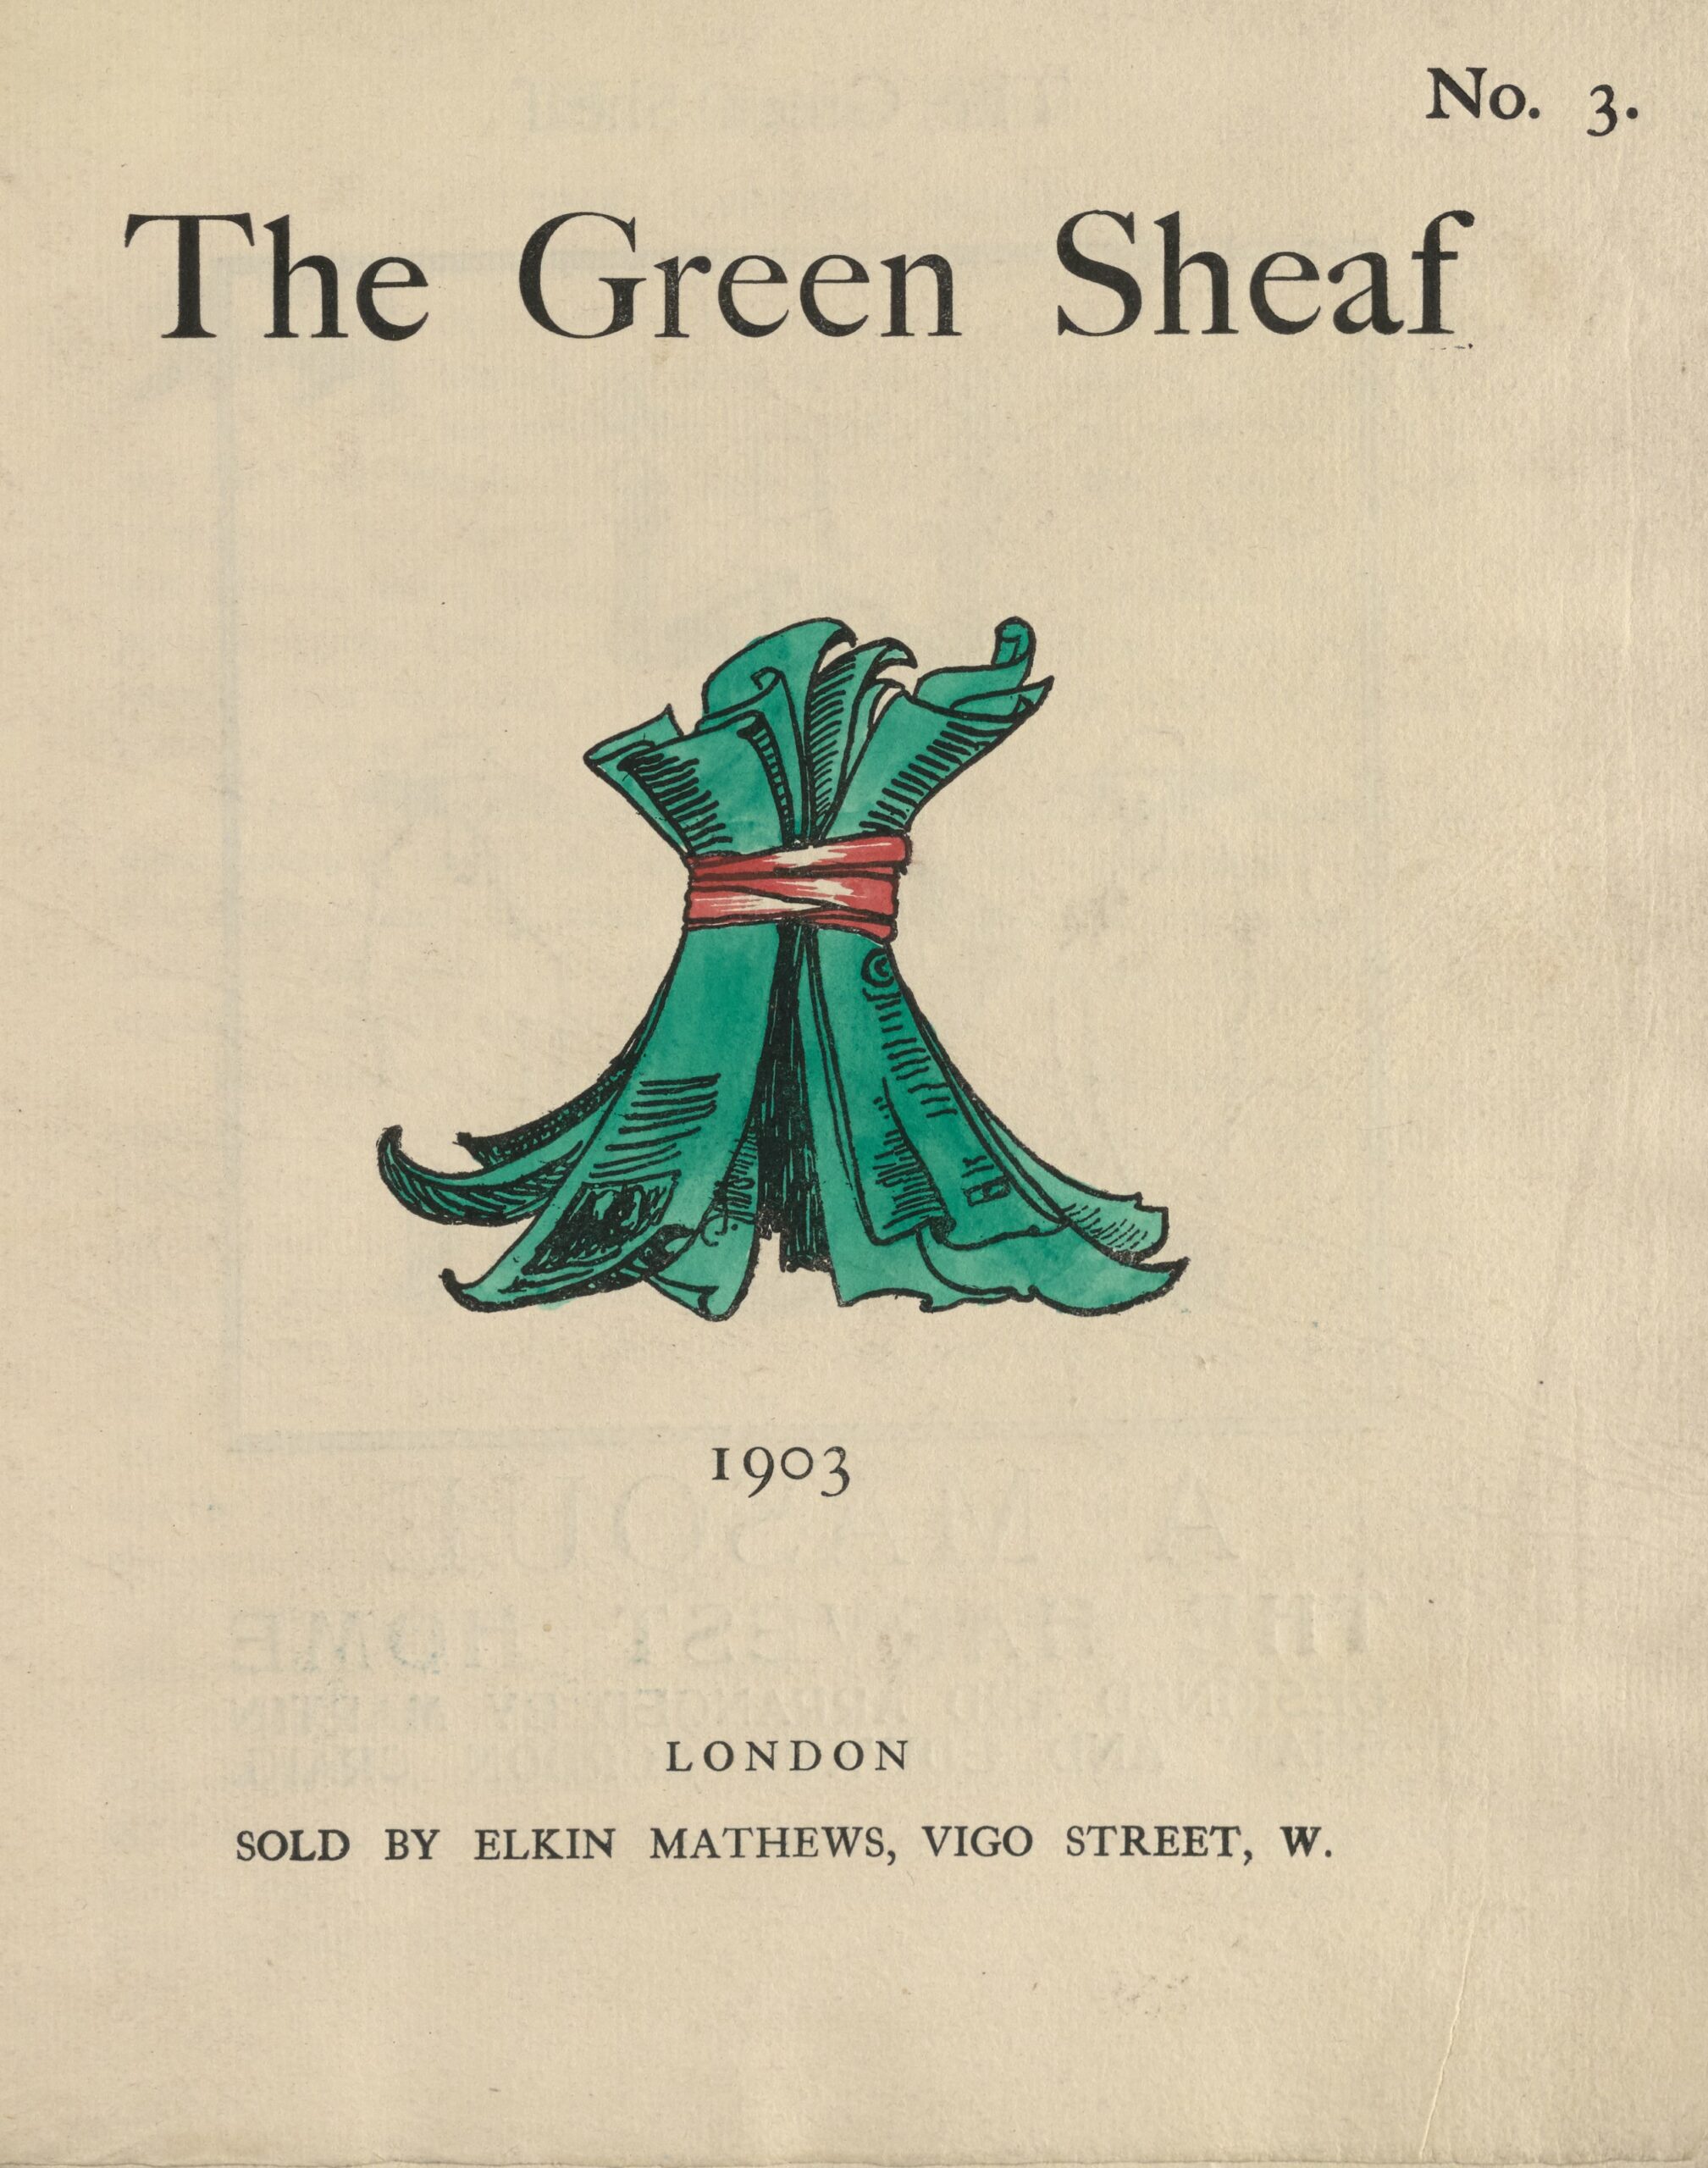 The unframed hand-coloured illustration is centered on the tan page. Above it, near the top of the page, the text “The Green Sheaf” is printed in black ink in a large serif font. It’s followed by a centered horizontal line, then the text “No. 3” in a smaller font. Below this is the central image, which depicts green-coloured pages, stacked to stand like a wheat sheaf, tied together with a red ribbon. The artist’s monogram is visible on one of the pages, which are lined to indicate type, with a rectangular sketch indicating an illustration. Below the Green Sheaf icon, centered on the page, is the year, 1903, followed, in slightly smaller text, by “LONDON / SOLD BY ELKIN MATTHEWS, VIGO STREET, W.”